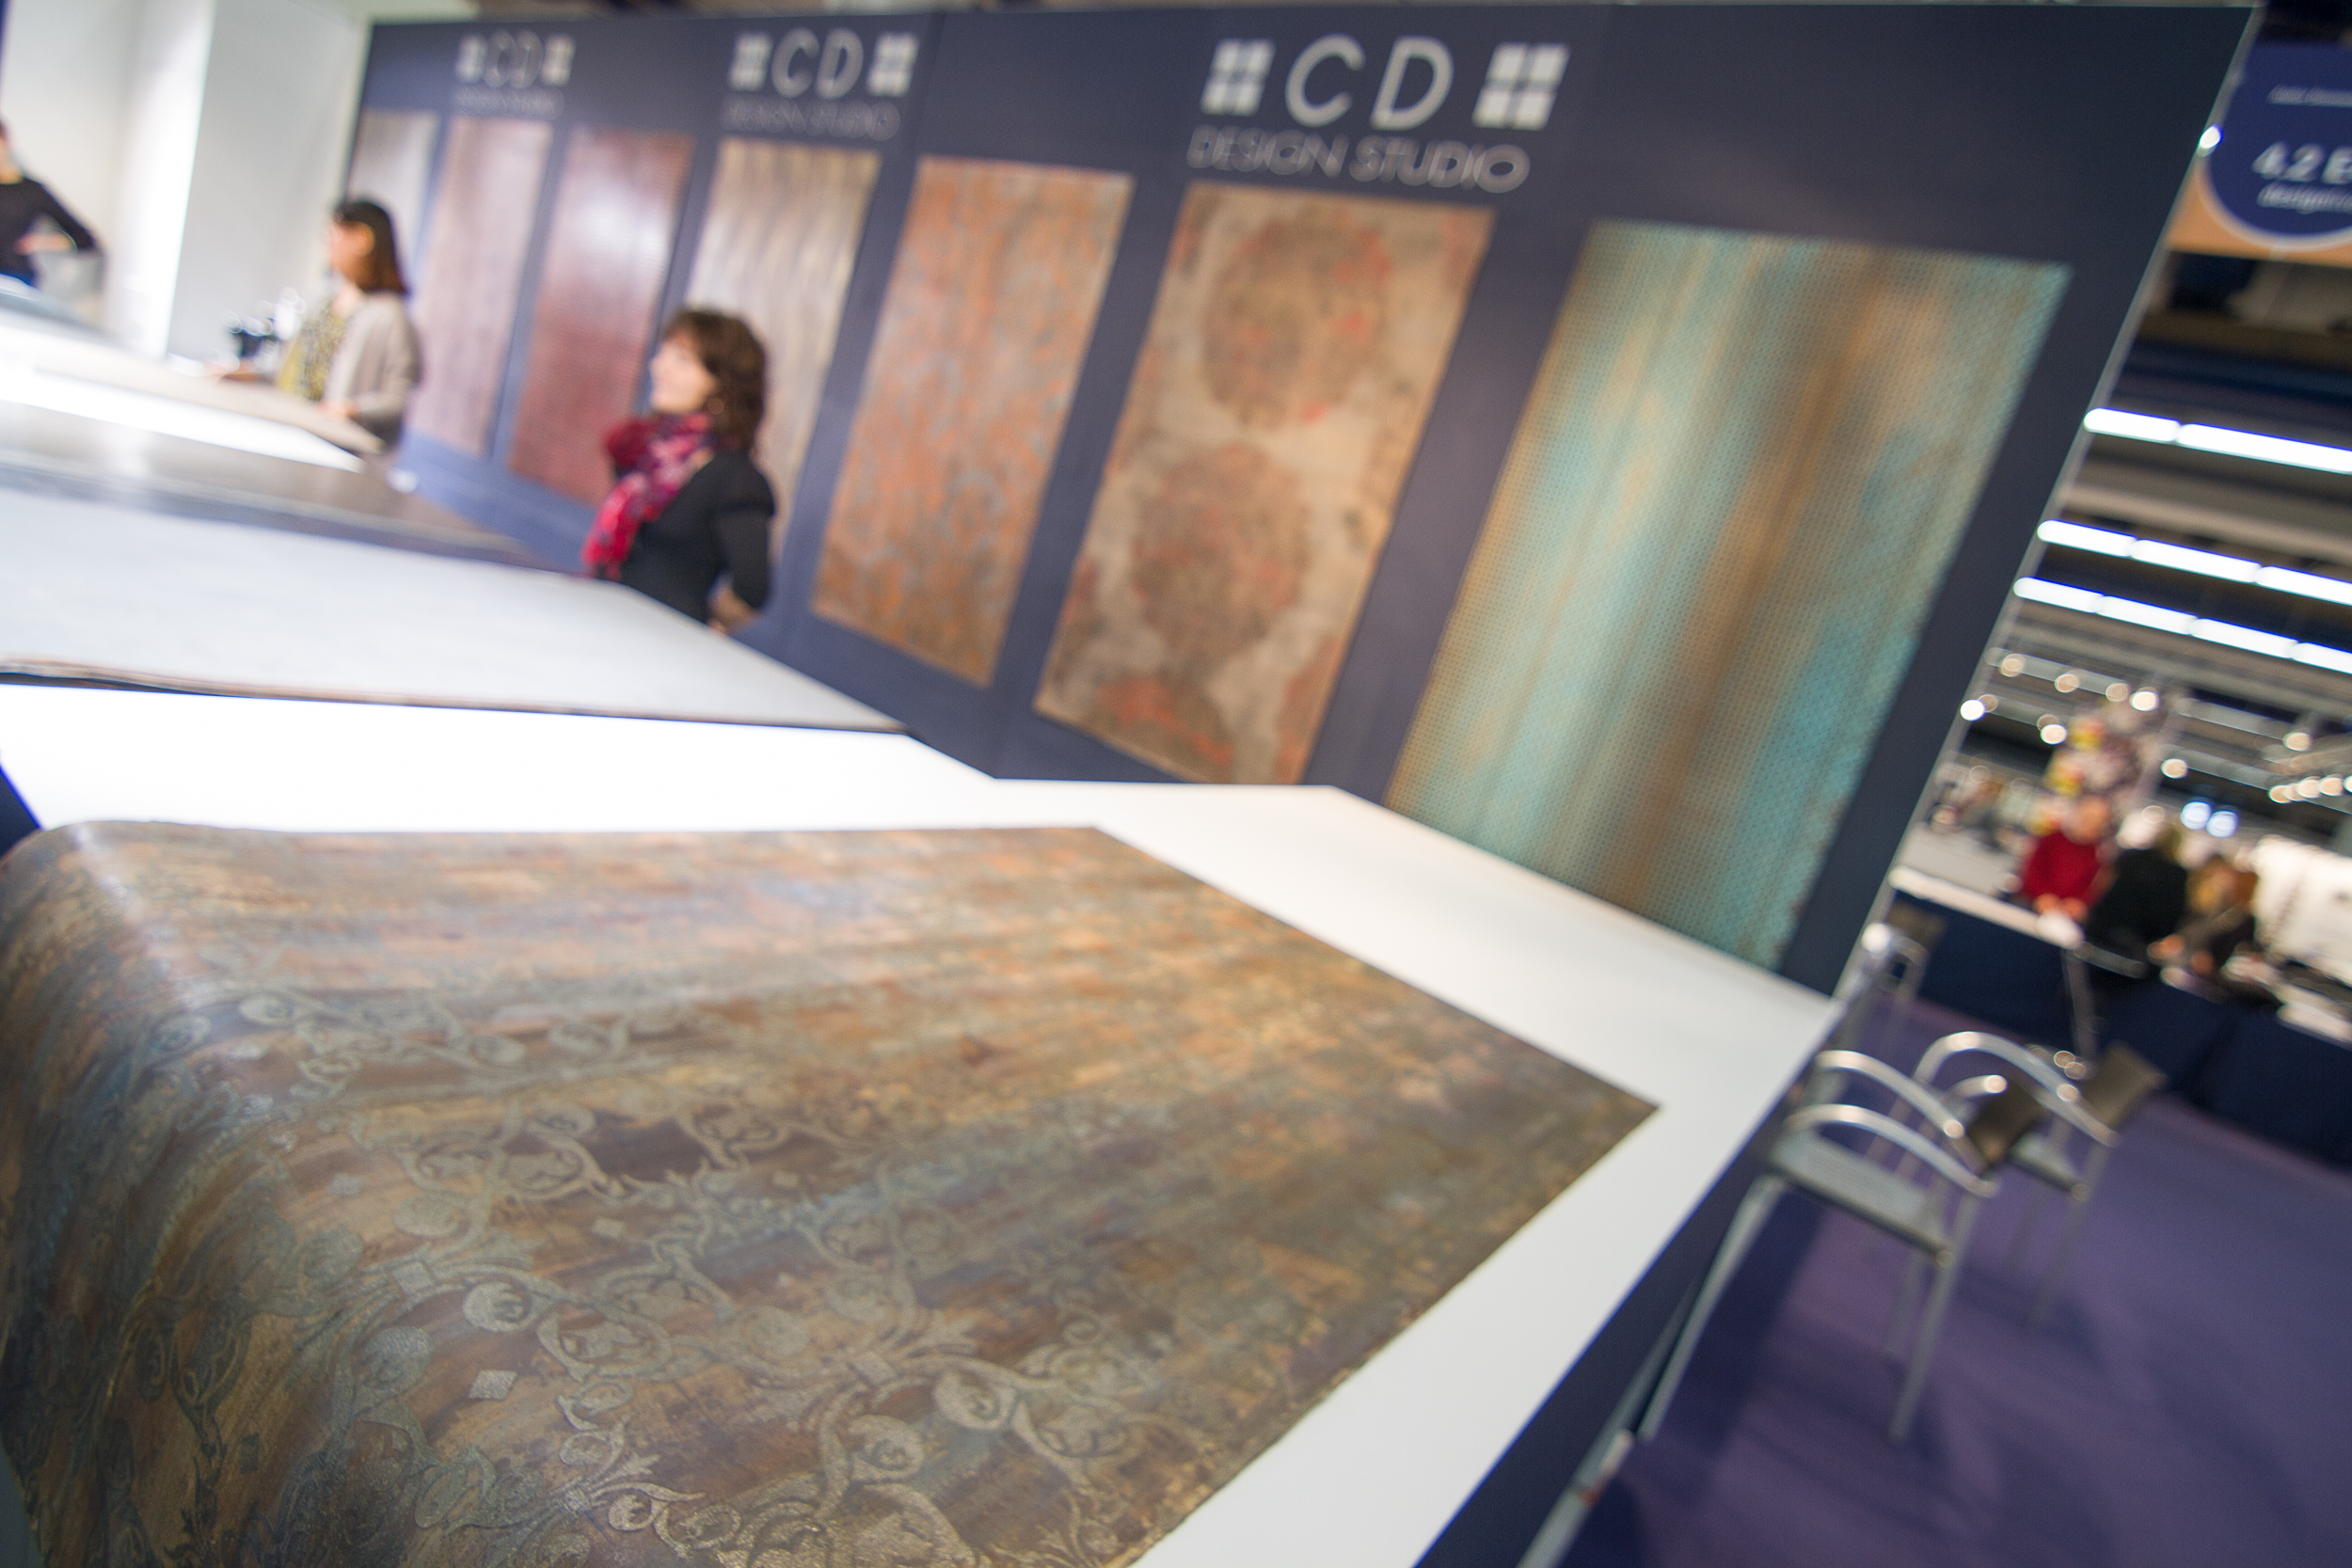  Designer Christian Dotzauer creates visuals for wall coverings, and shows his concepts every year at Heimtextil. His company, CD Design, also creates visuals for the flooring and laminates industry. 